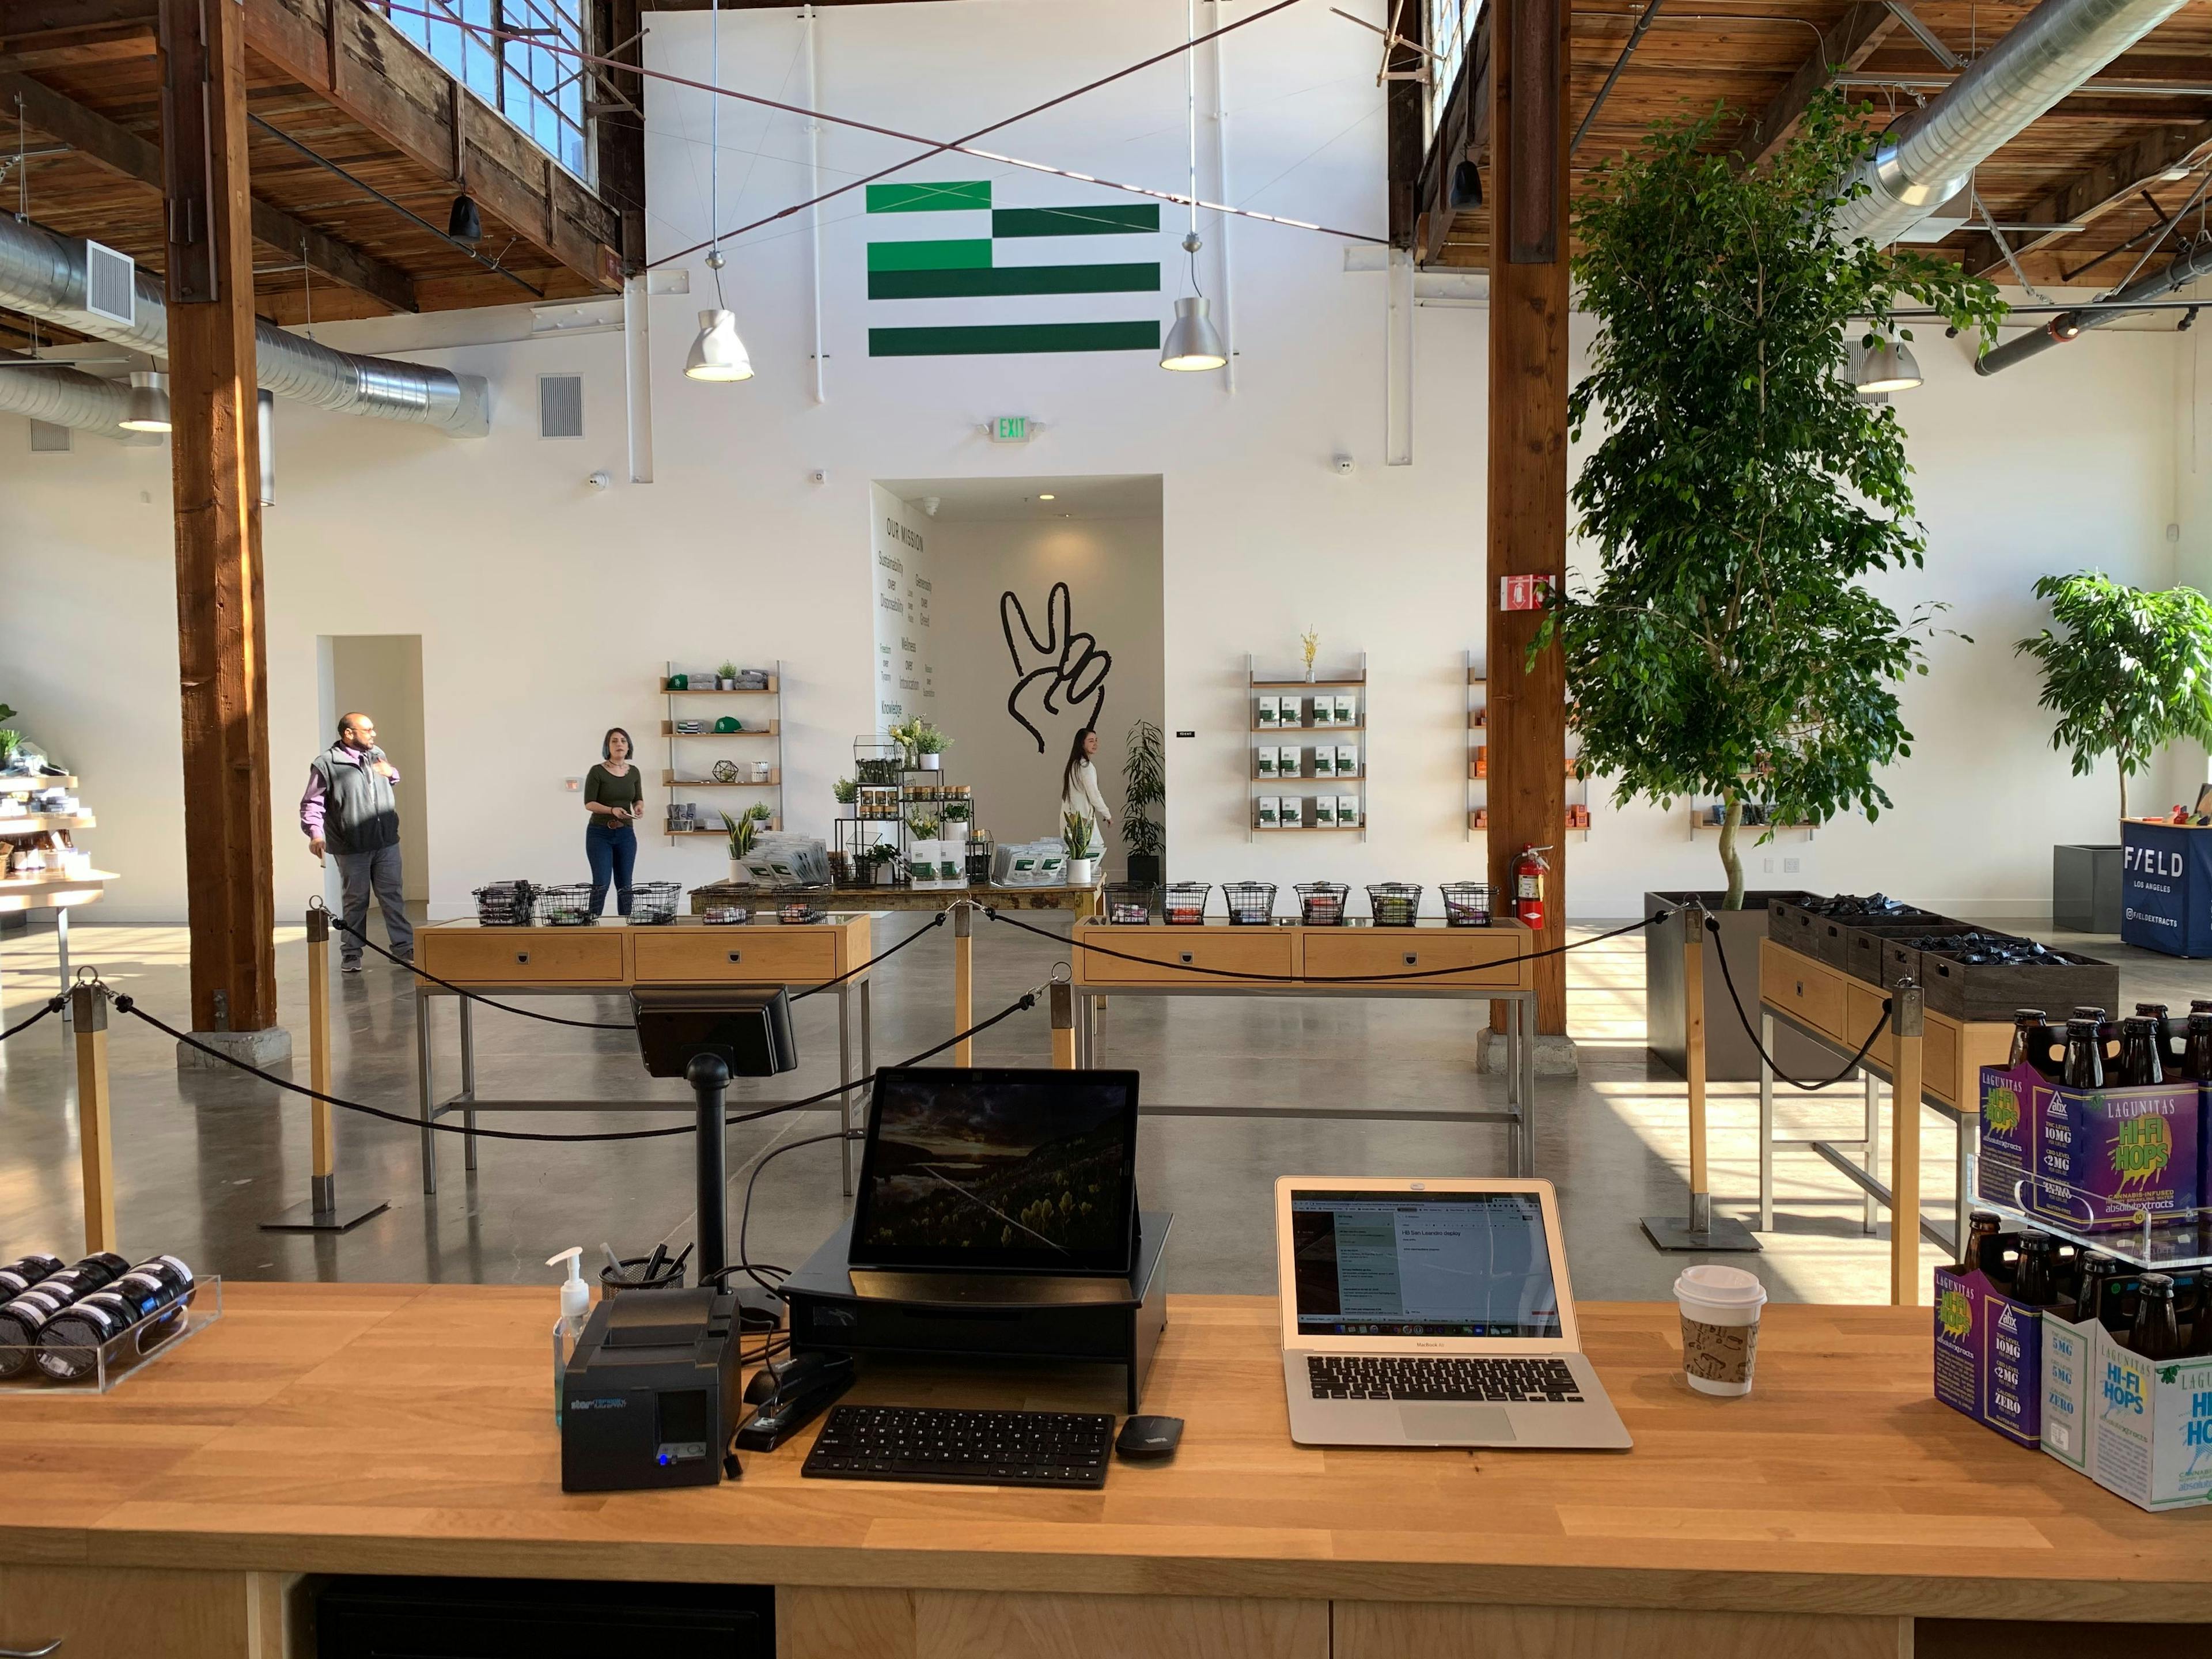 Clean dispensary visual with cannabis point of sale.